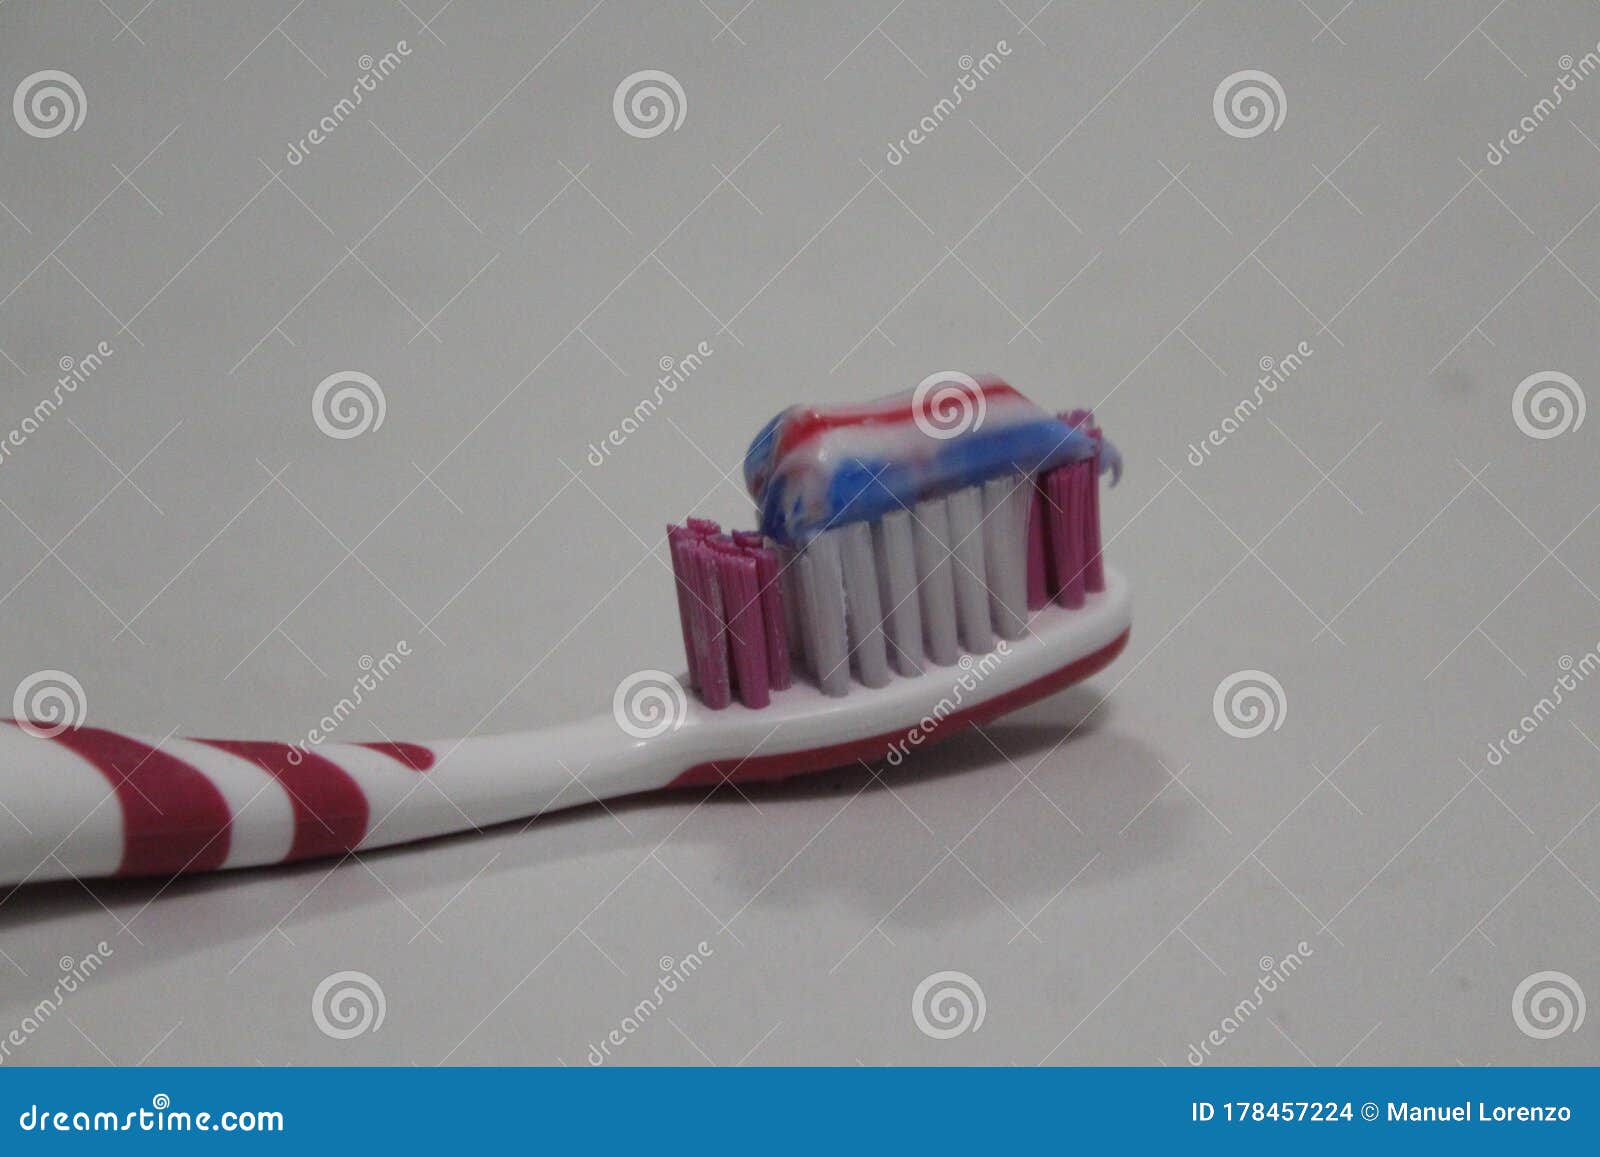 teeth cleaning hygiene brush soft disinfection toothpaste